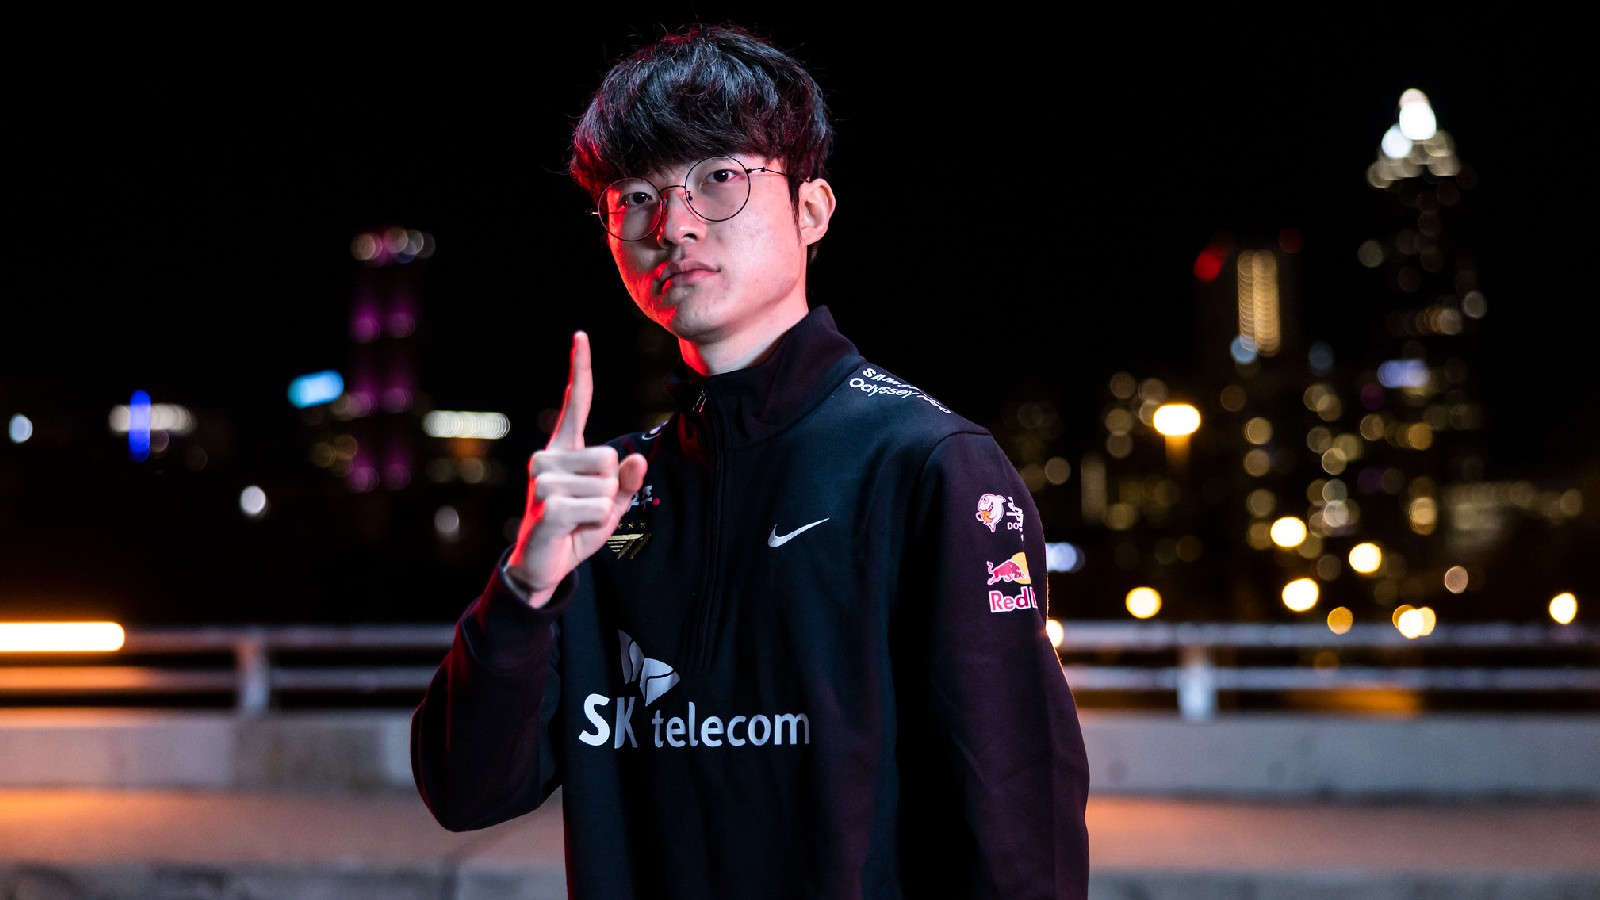 T1 Faker to take break from competing due to arm injury - Dexerto